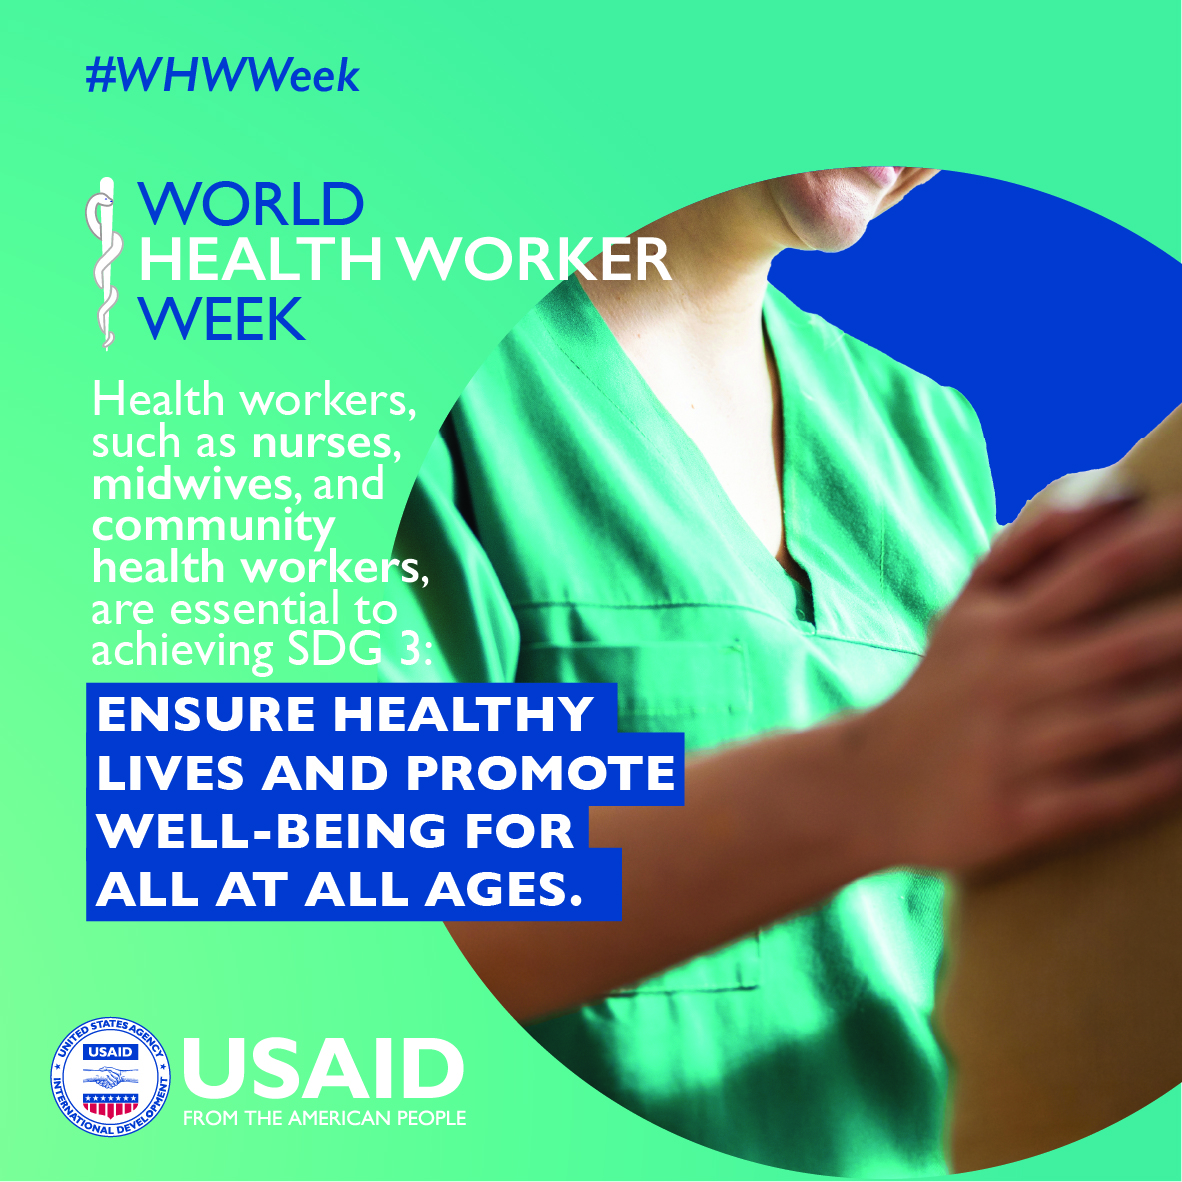 USAID knows we need #SafeAndSupportedHealthWorkers to advance Sustainable Development Goal 3: Ensure healthy lives and promote well-being for all at all ages.